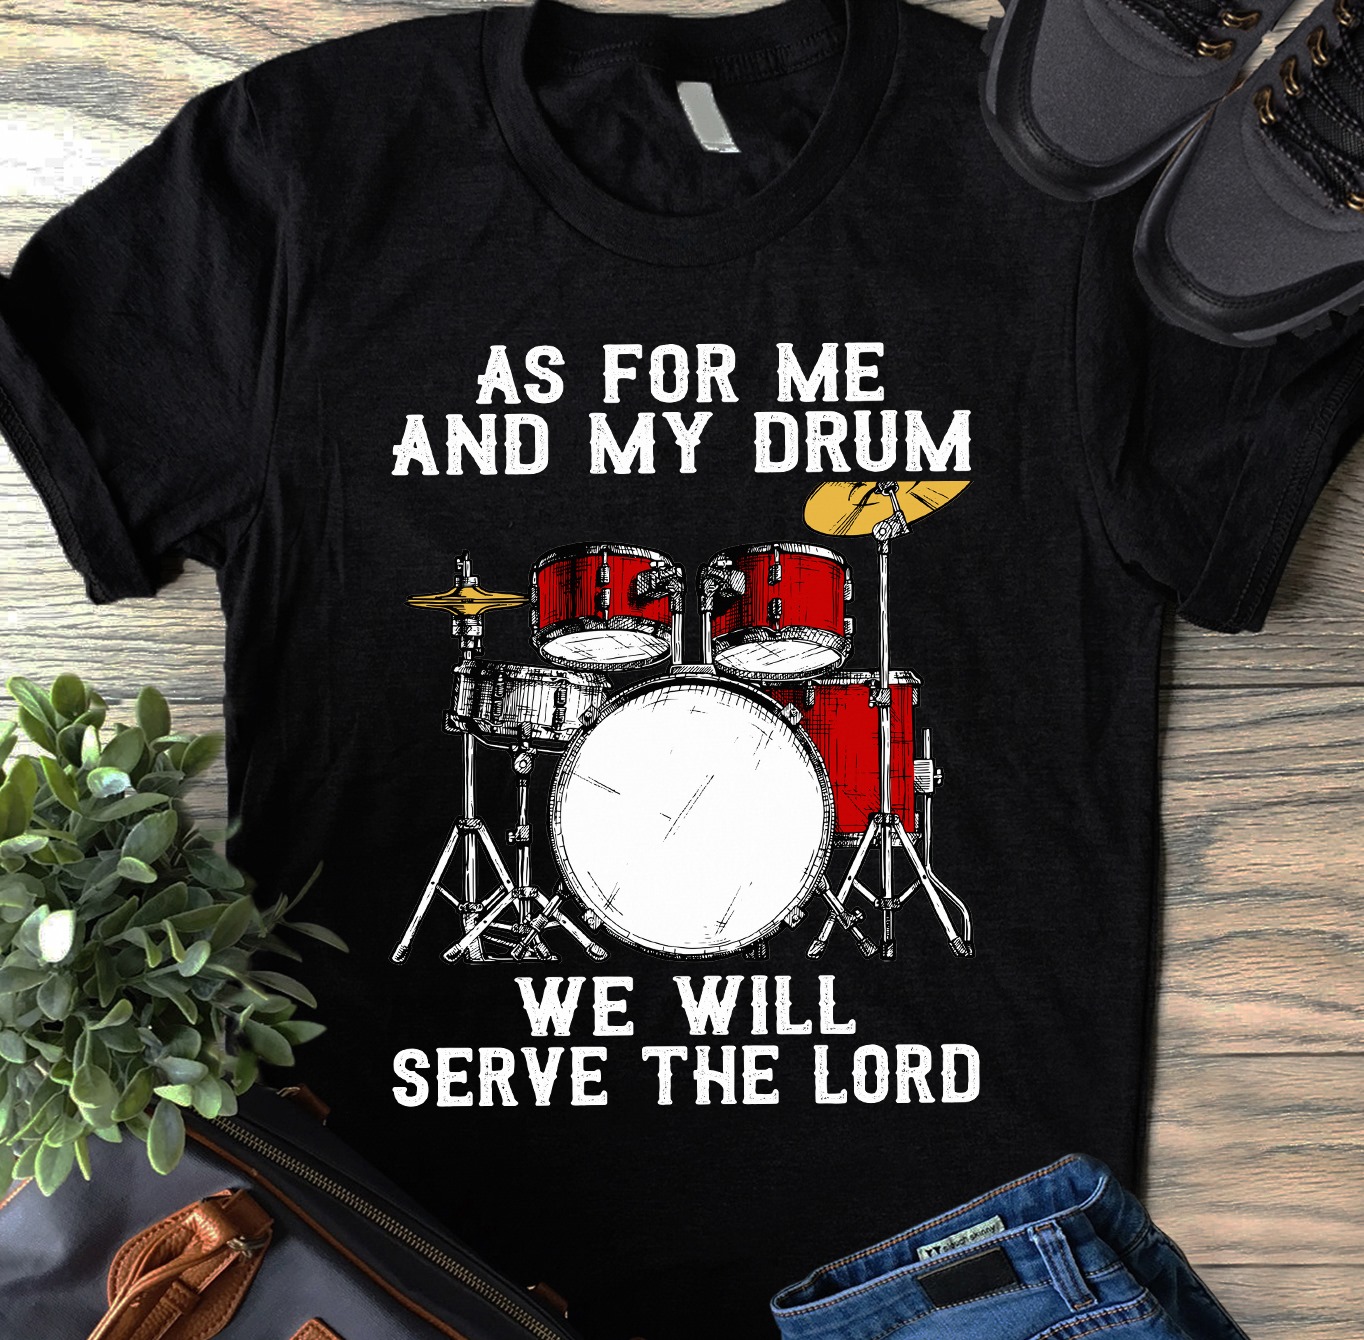 As for me and my drum we will serve the lord - The drummer